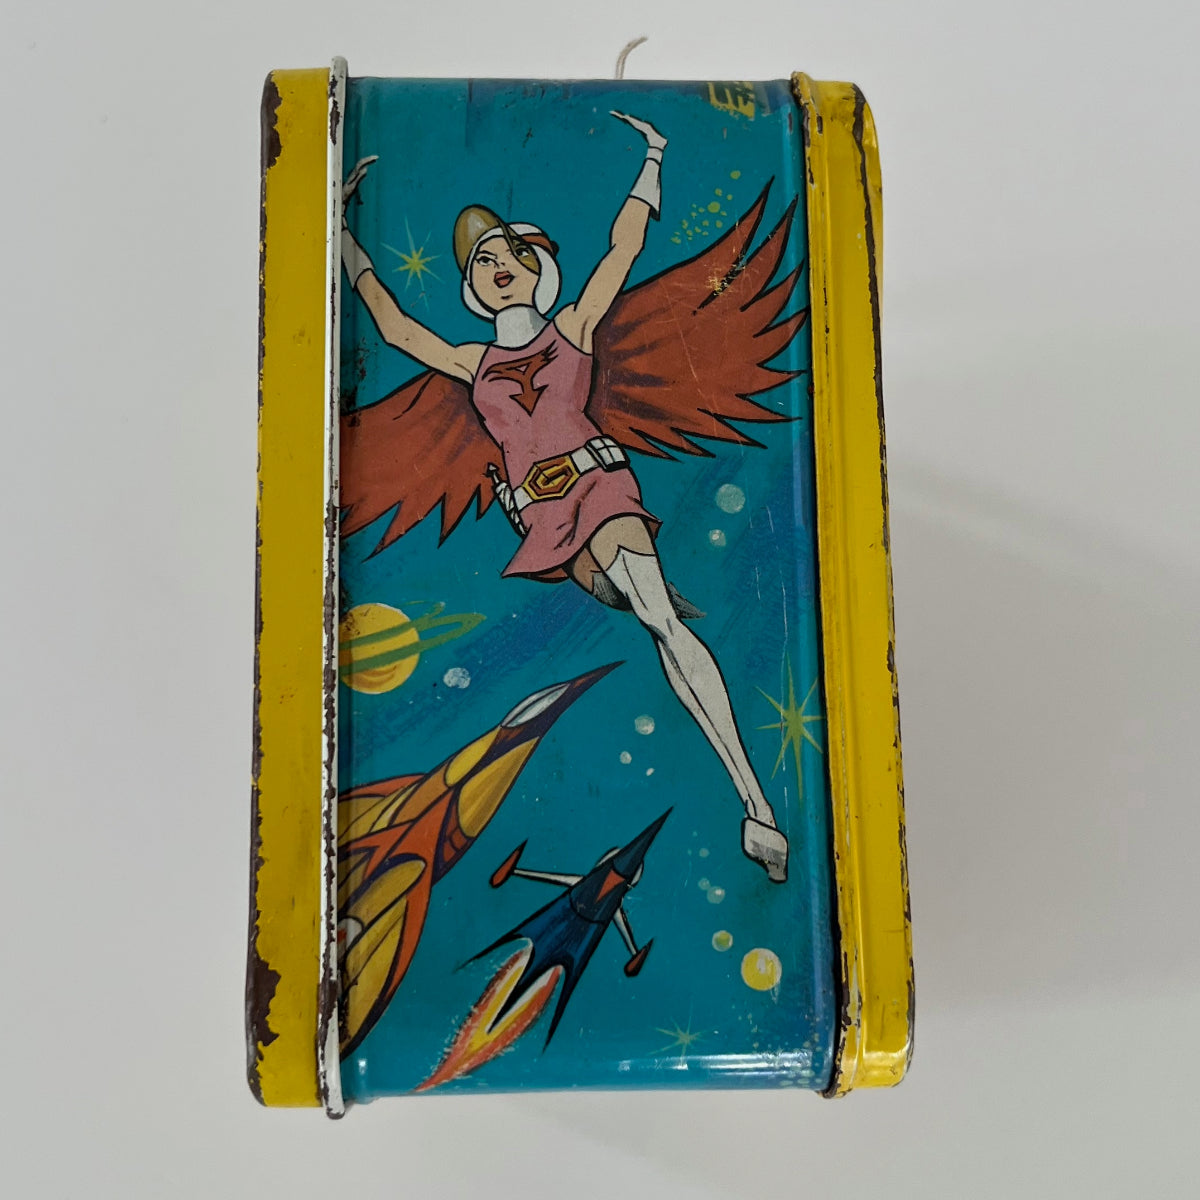 1979 Vintage Battle Of The Planets Lunchbox with Thermos